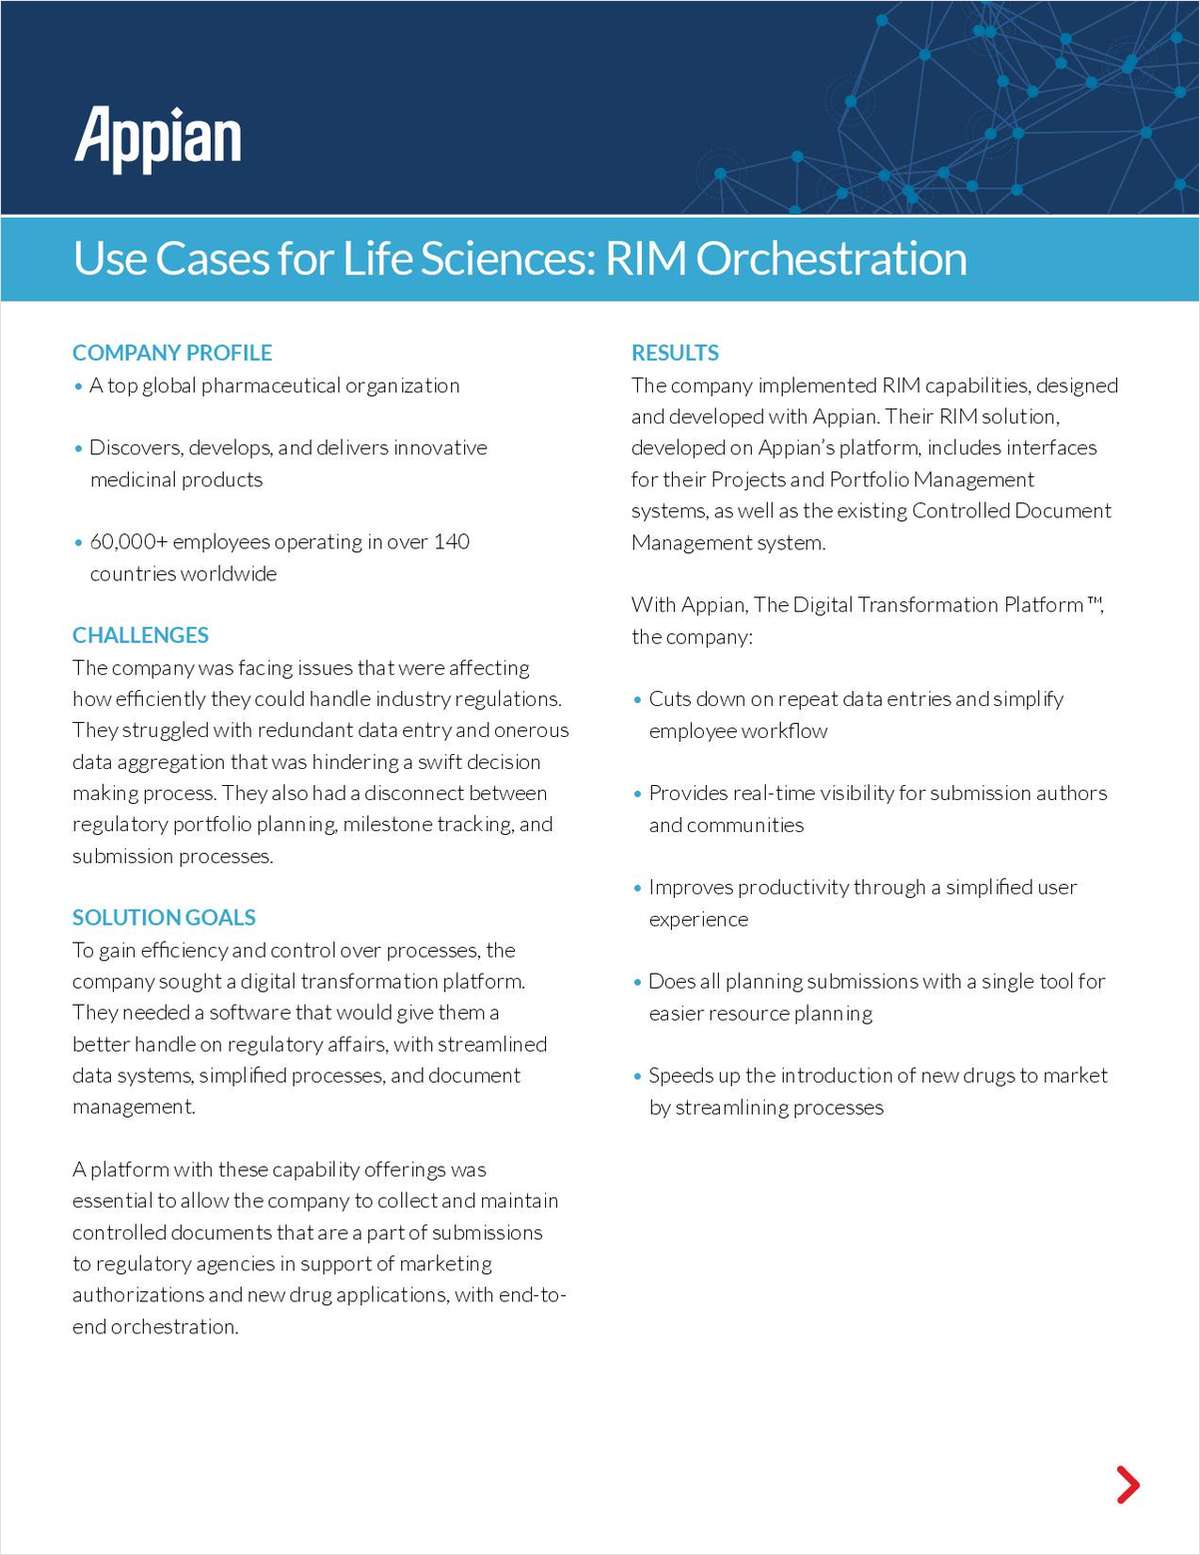 Use Cases for Life Sciences: RIM Orchestration